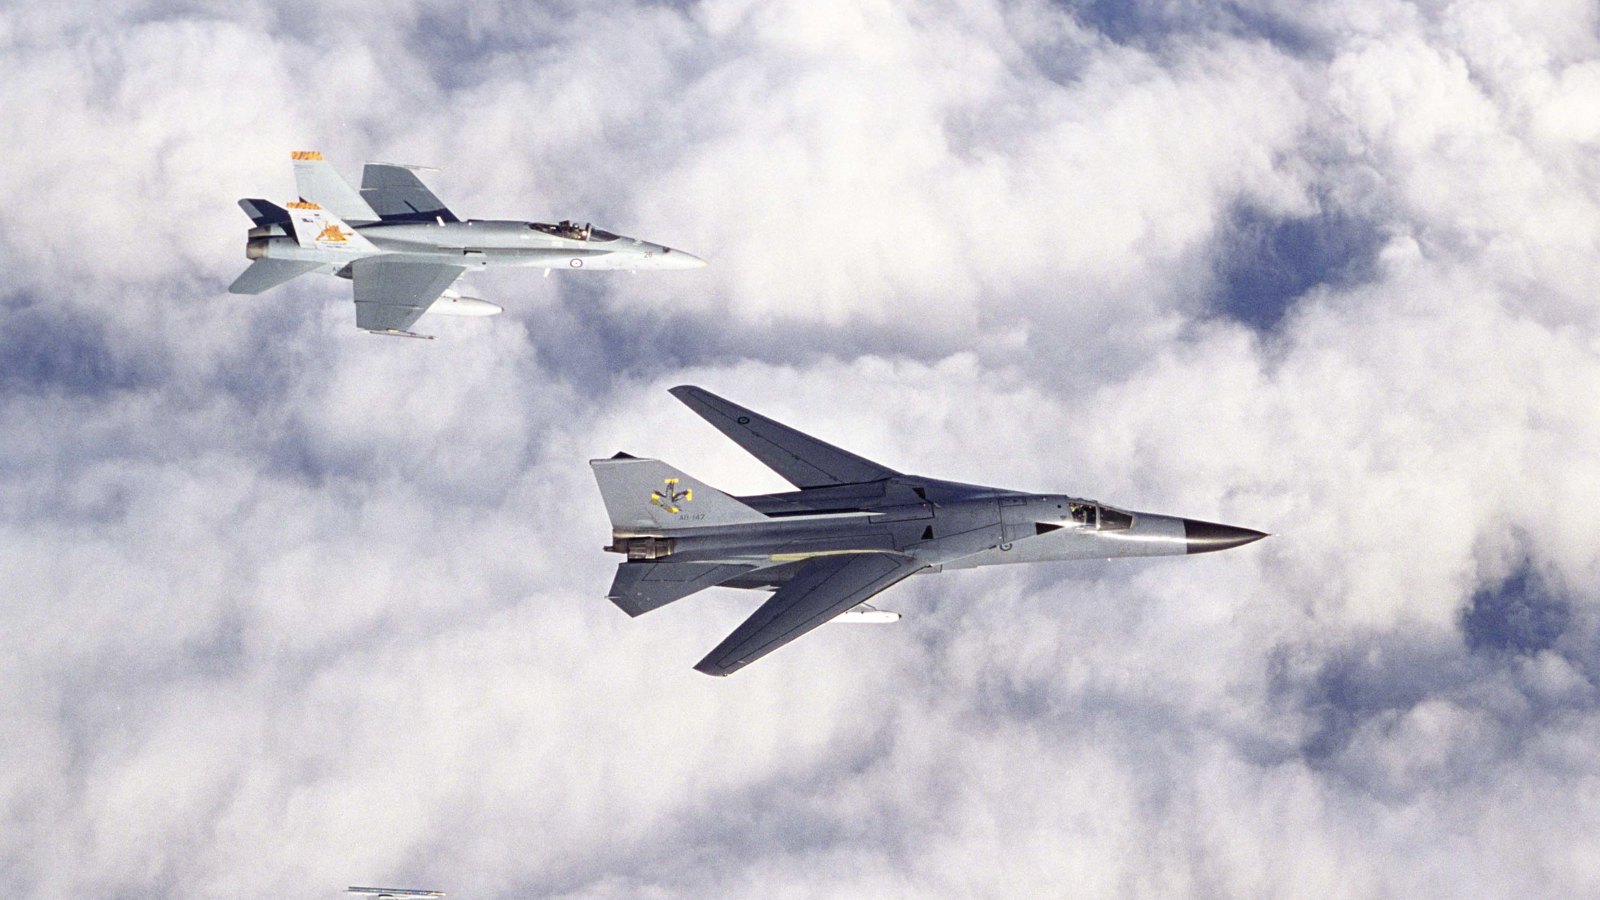 163-482 F-111, F/A-18 and Hawk 127 Formation